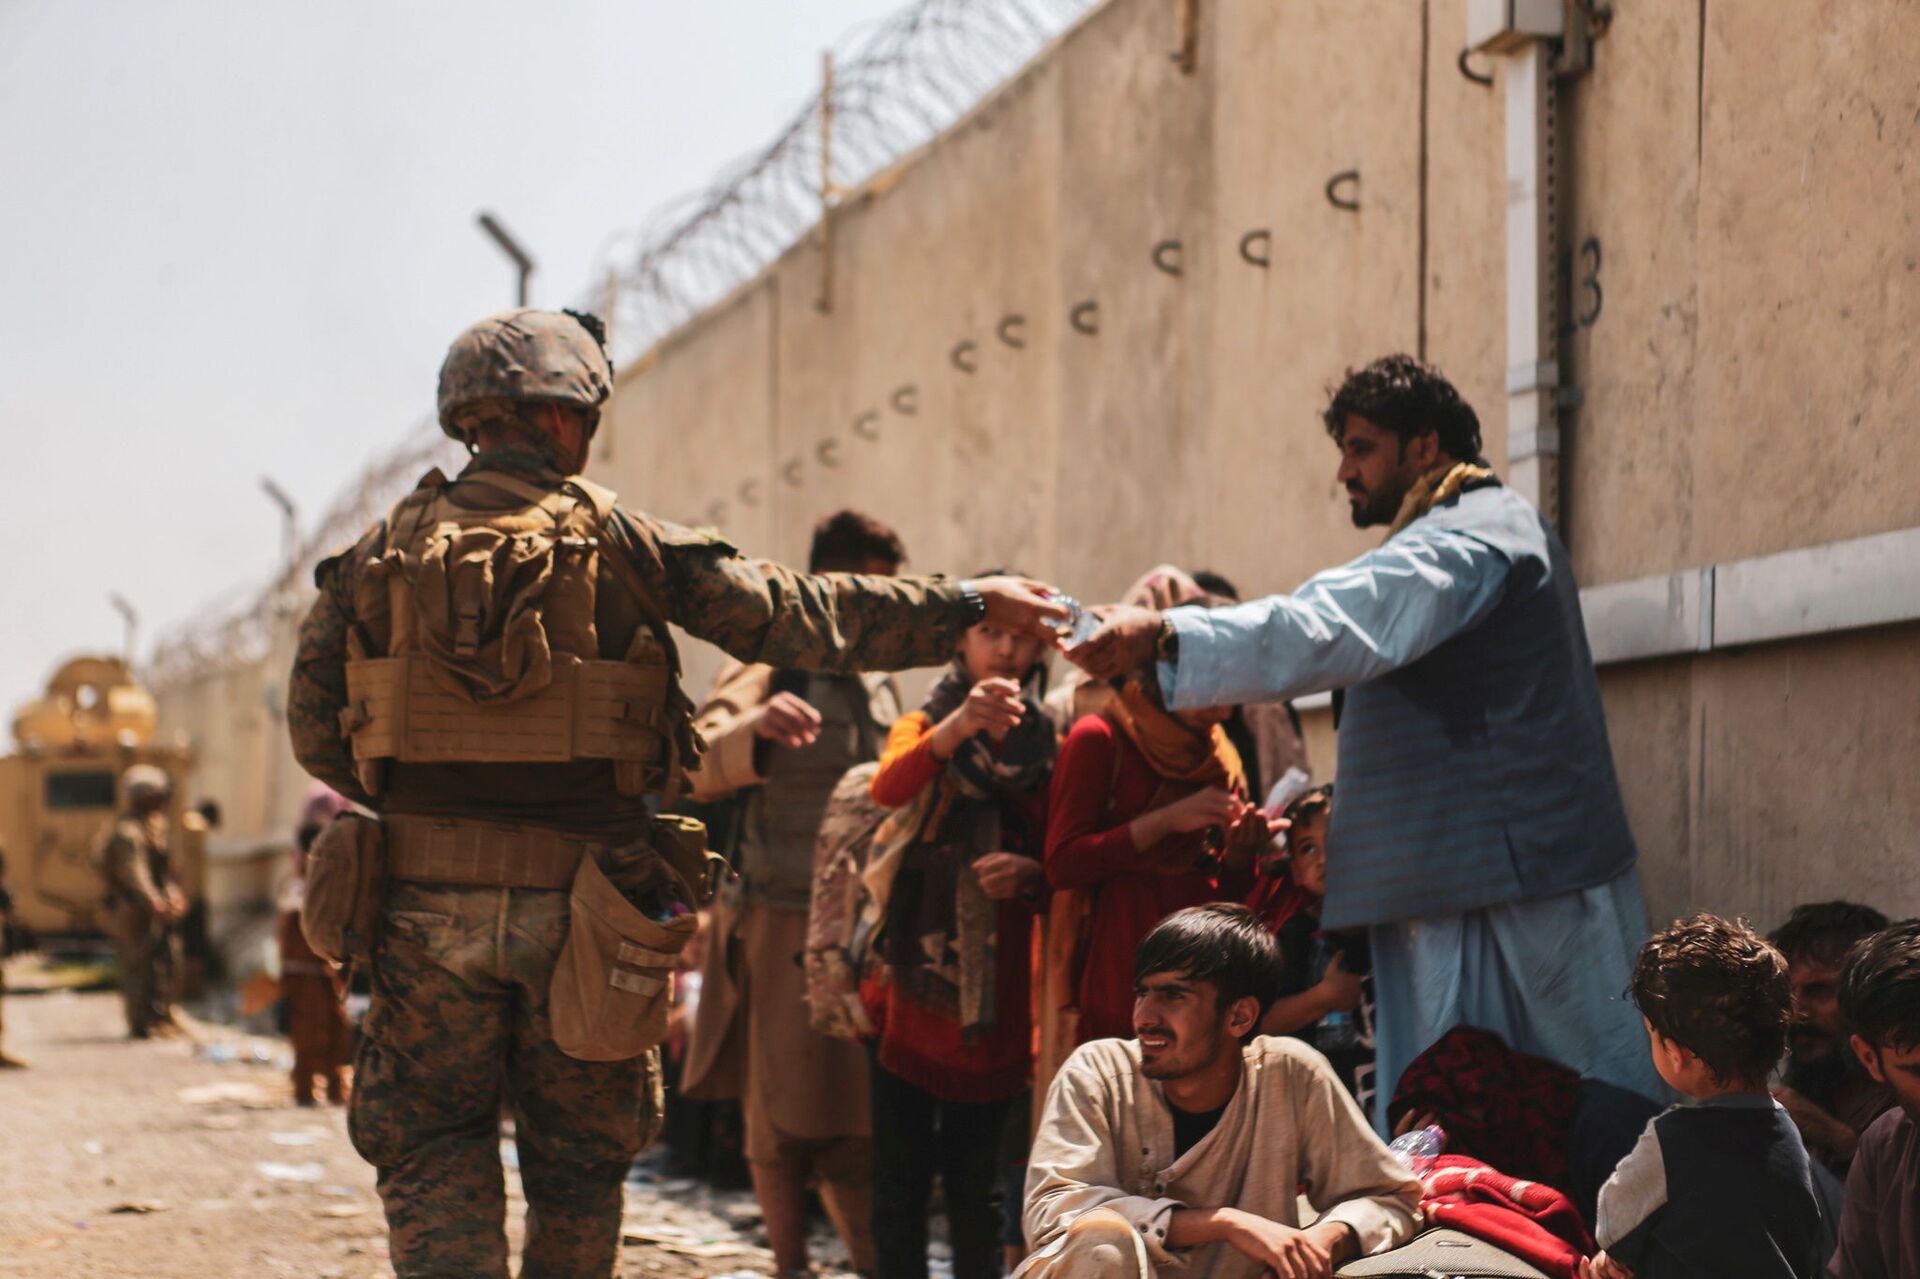 A US Marine passes out water to evacuees during an evacuation at Hamid Karzai International Airport, Kabul, Afghanistan, August 22, 2021 - Sputnik International, 1920, 07.09.2021